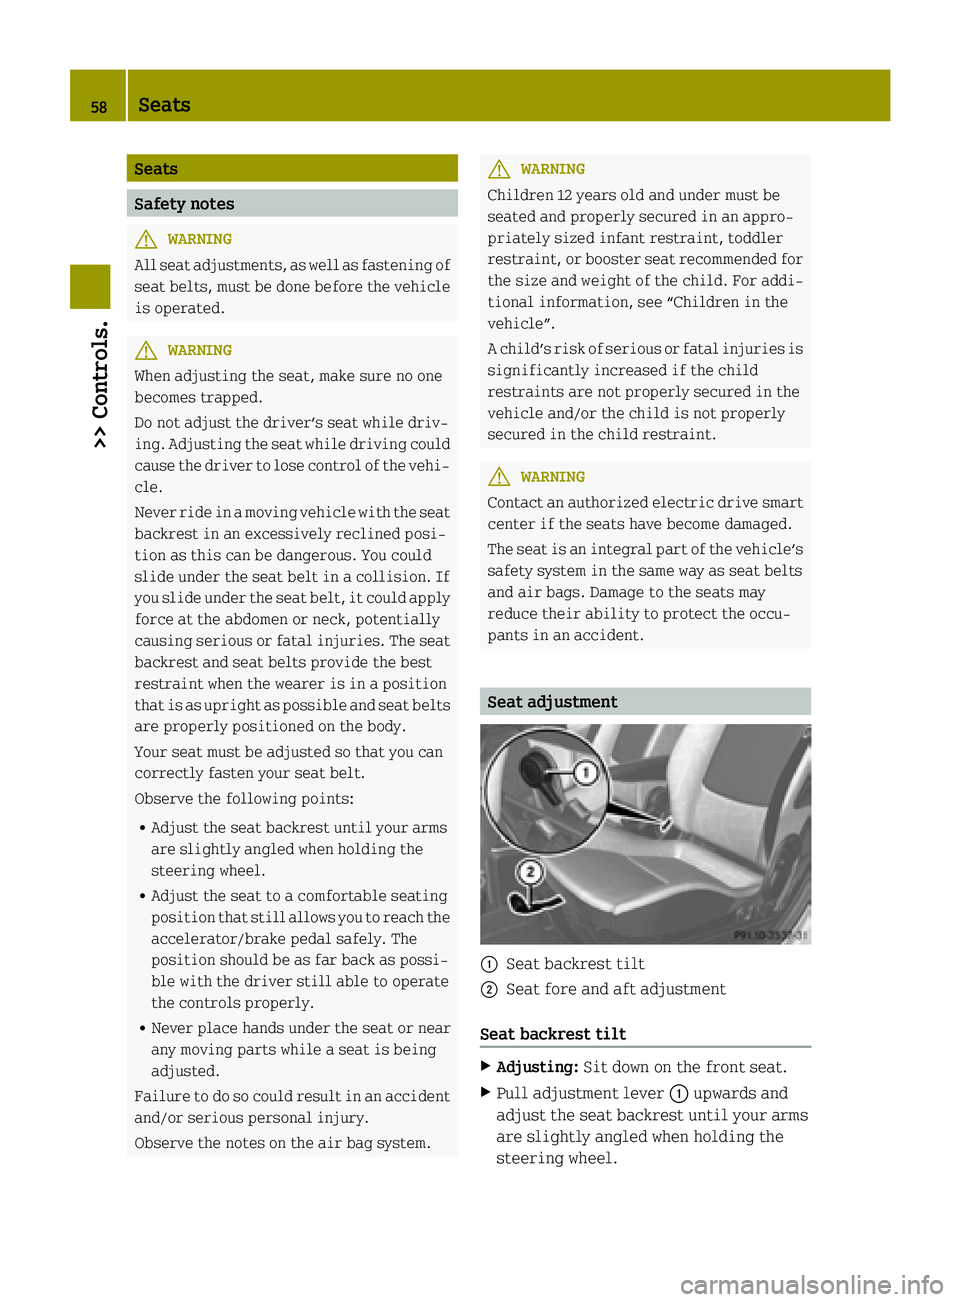 SMART FORTWO COUPE ELECTRIC DRIVE 2015 User Guide Seats
Safety notes
G
WARNING
All seat adjustments, as well as fastening of seat belts, must be done before the vehicle
is operated. G
WARNING
When adjusting the seat, make sure no one
becomes trapped.